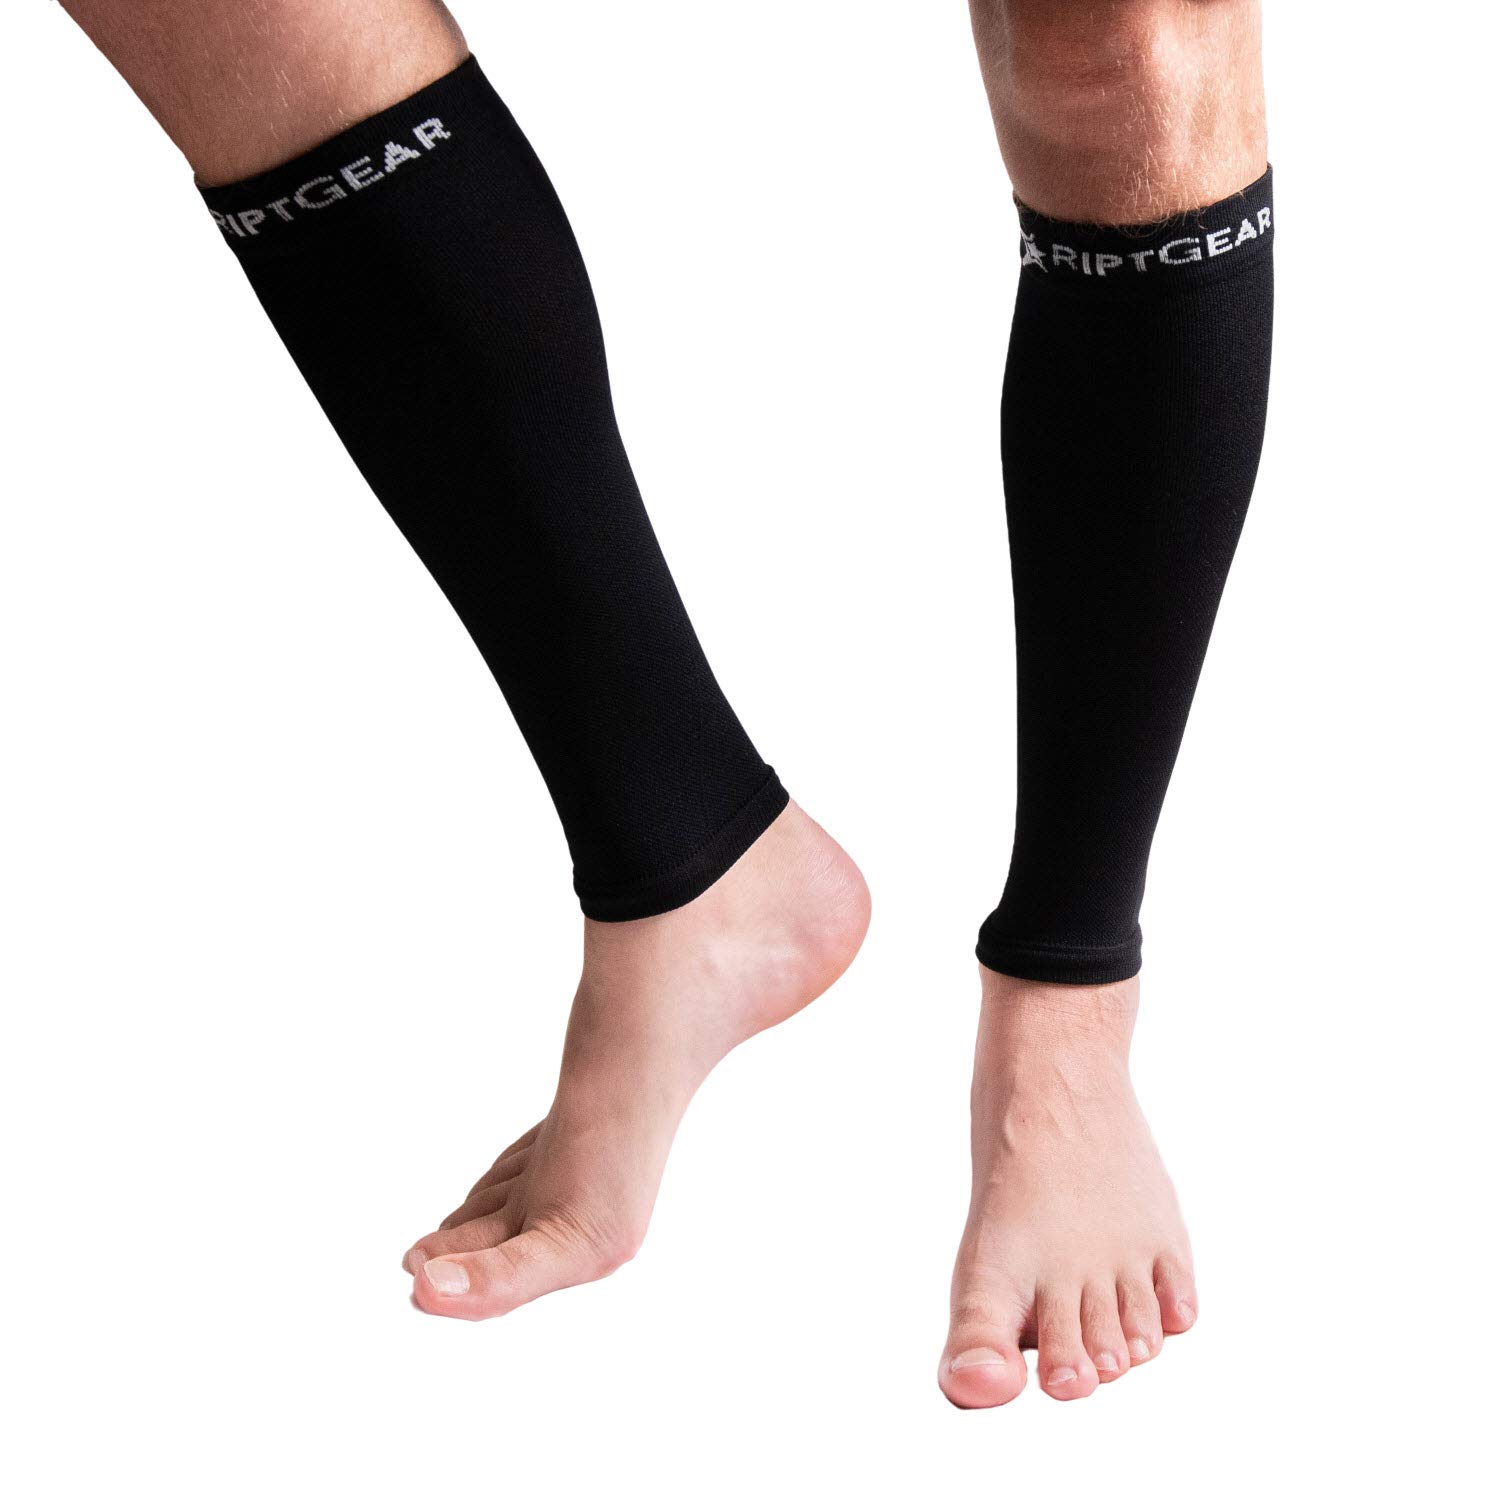 Slimming Compression Footless Tights - 3 Pair Pack